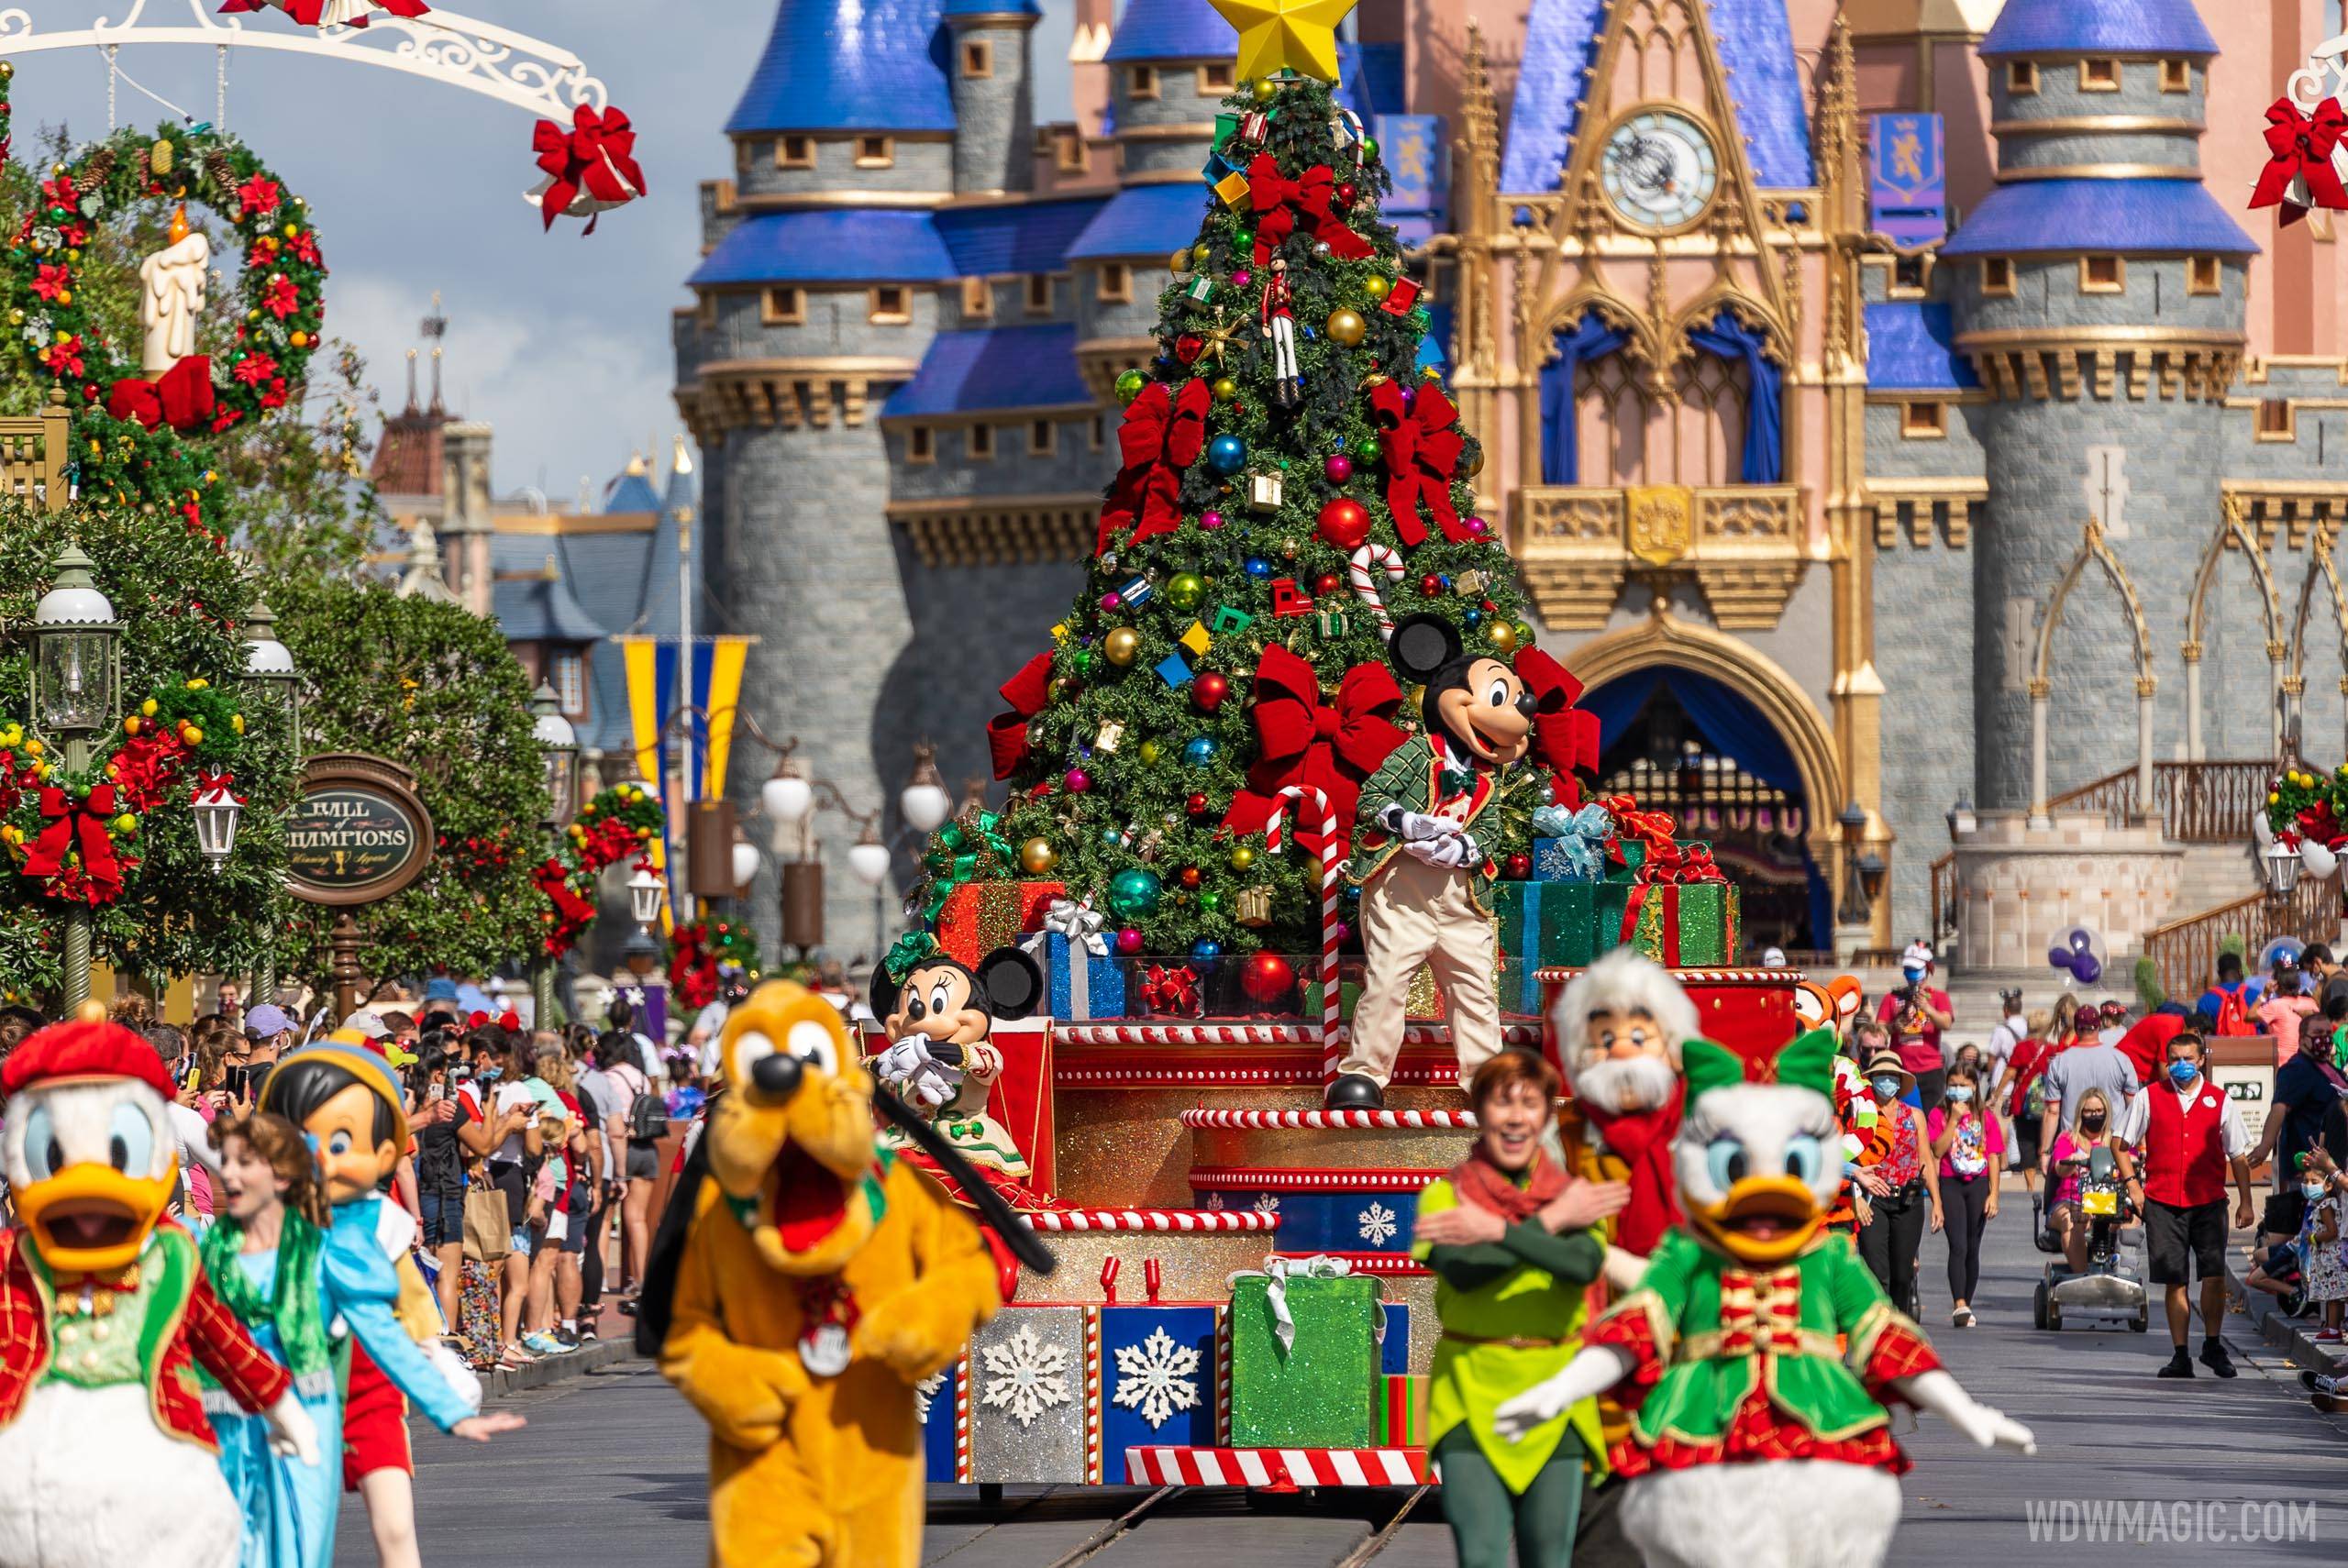 Operating hours are now available for Magic Kingdom through December 28